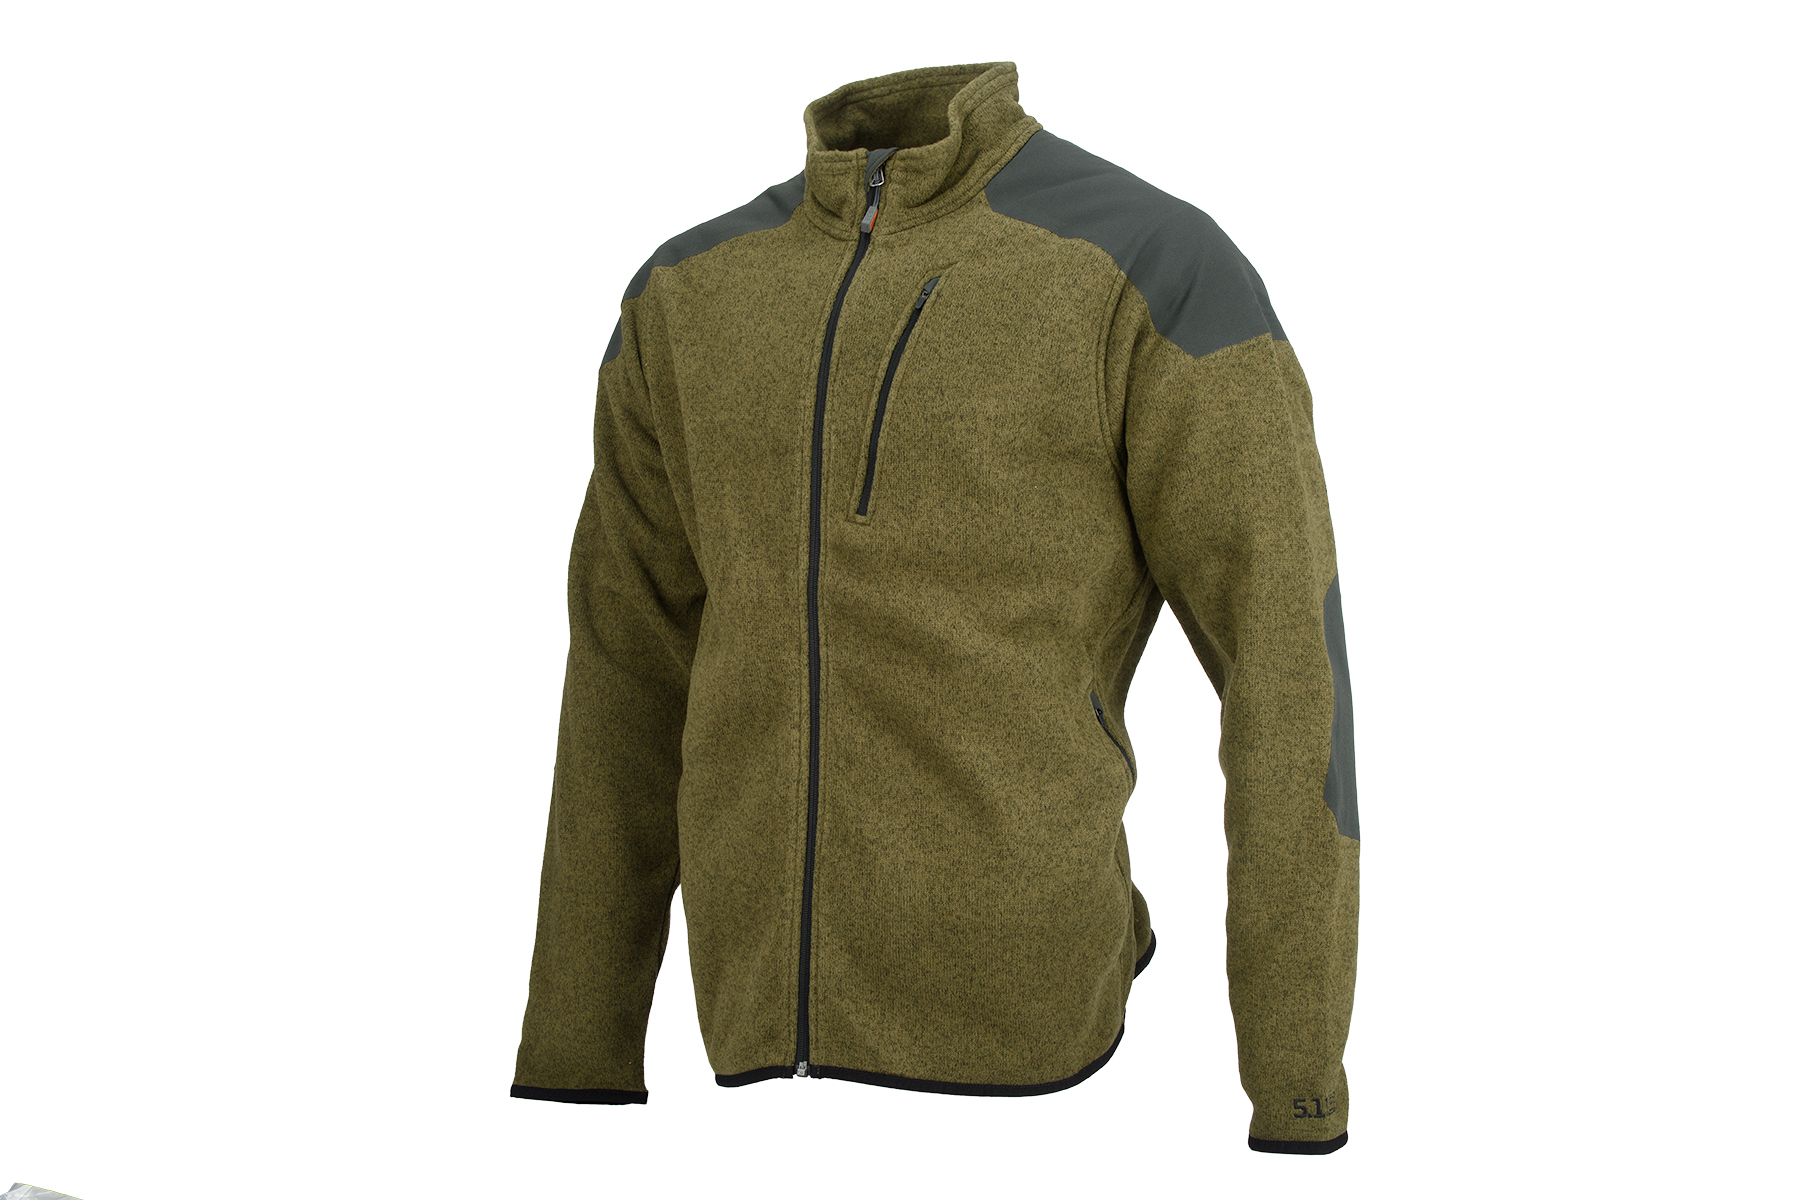 511-72407-206-XL 5.11 TACTICAL FULL ZIP TDU SWEATER X-LARGE (FIELD GREEN) - Click Image to Close